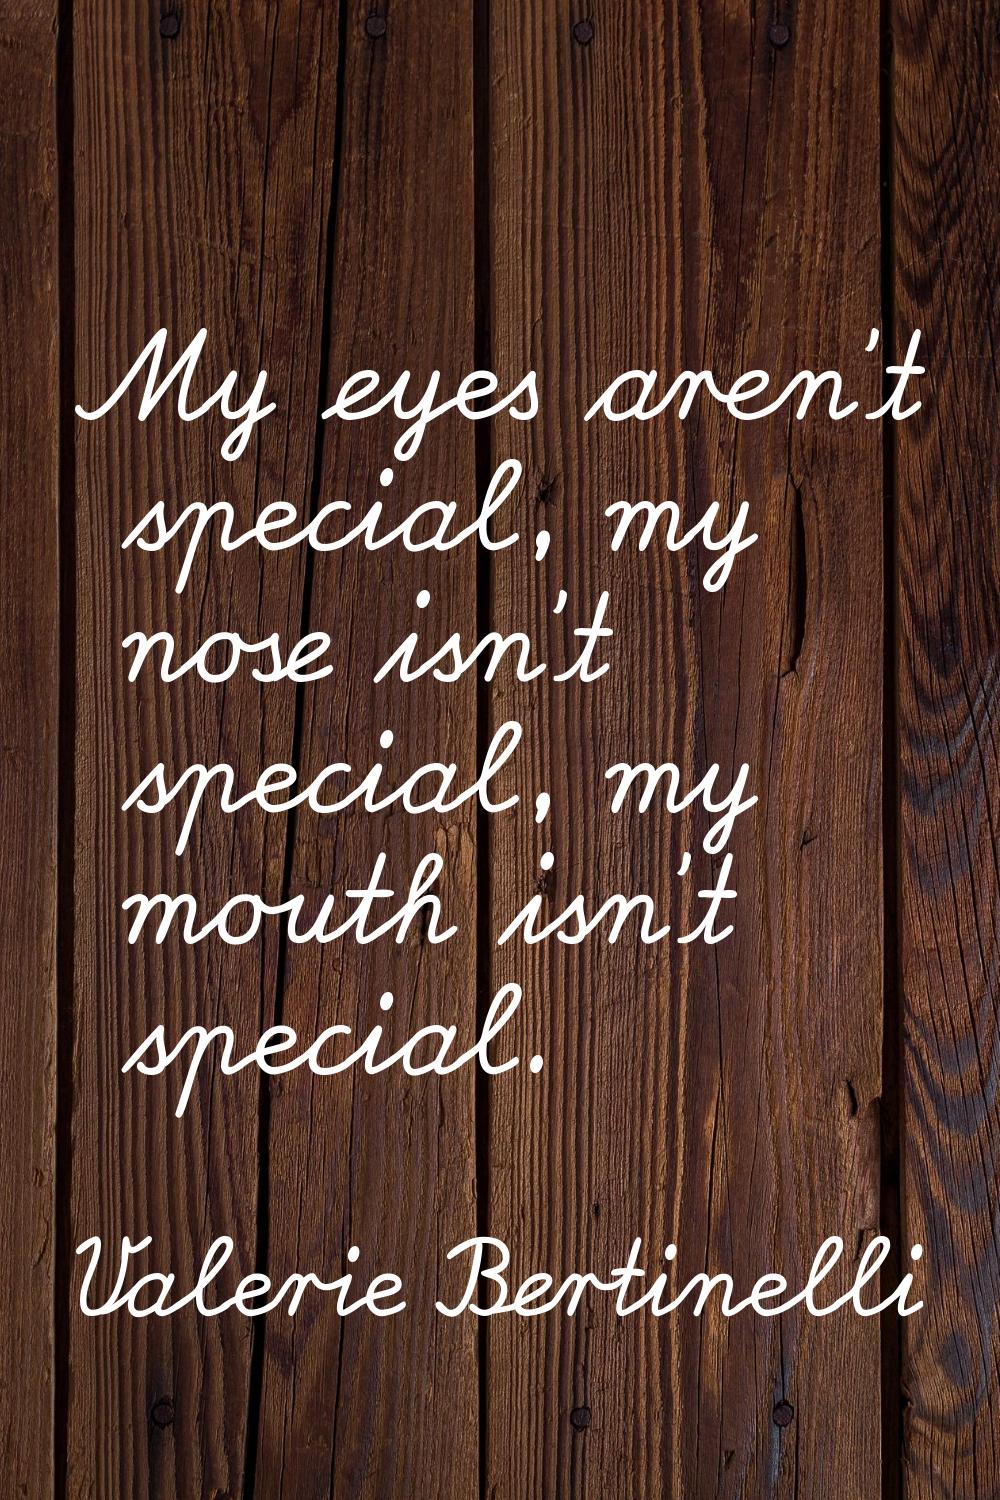 My eyes aren't special, my nose isn't special, my mouth isn't special.